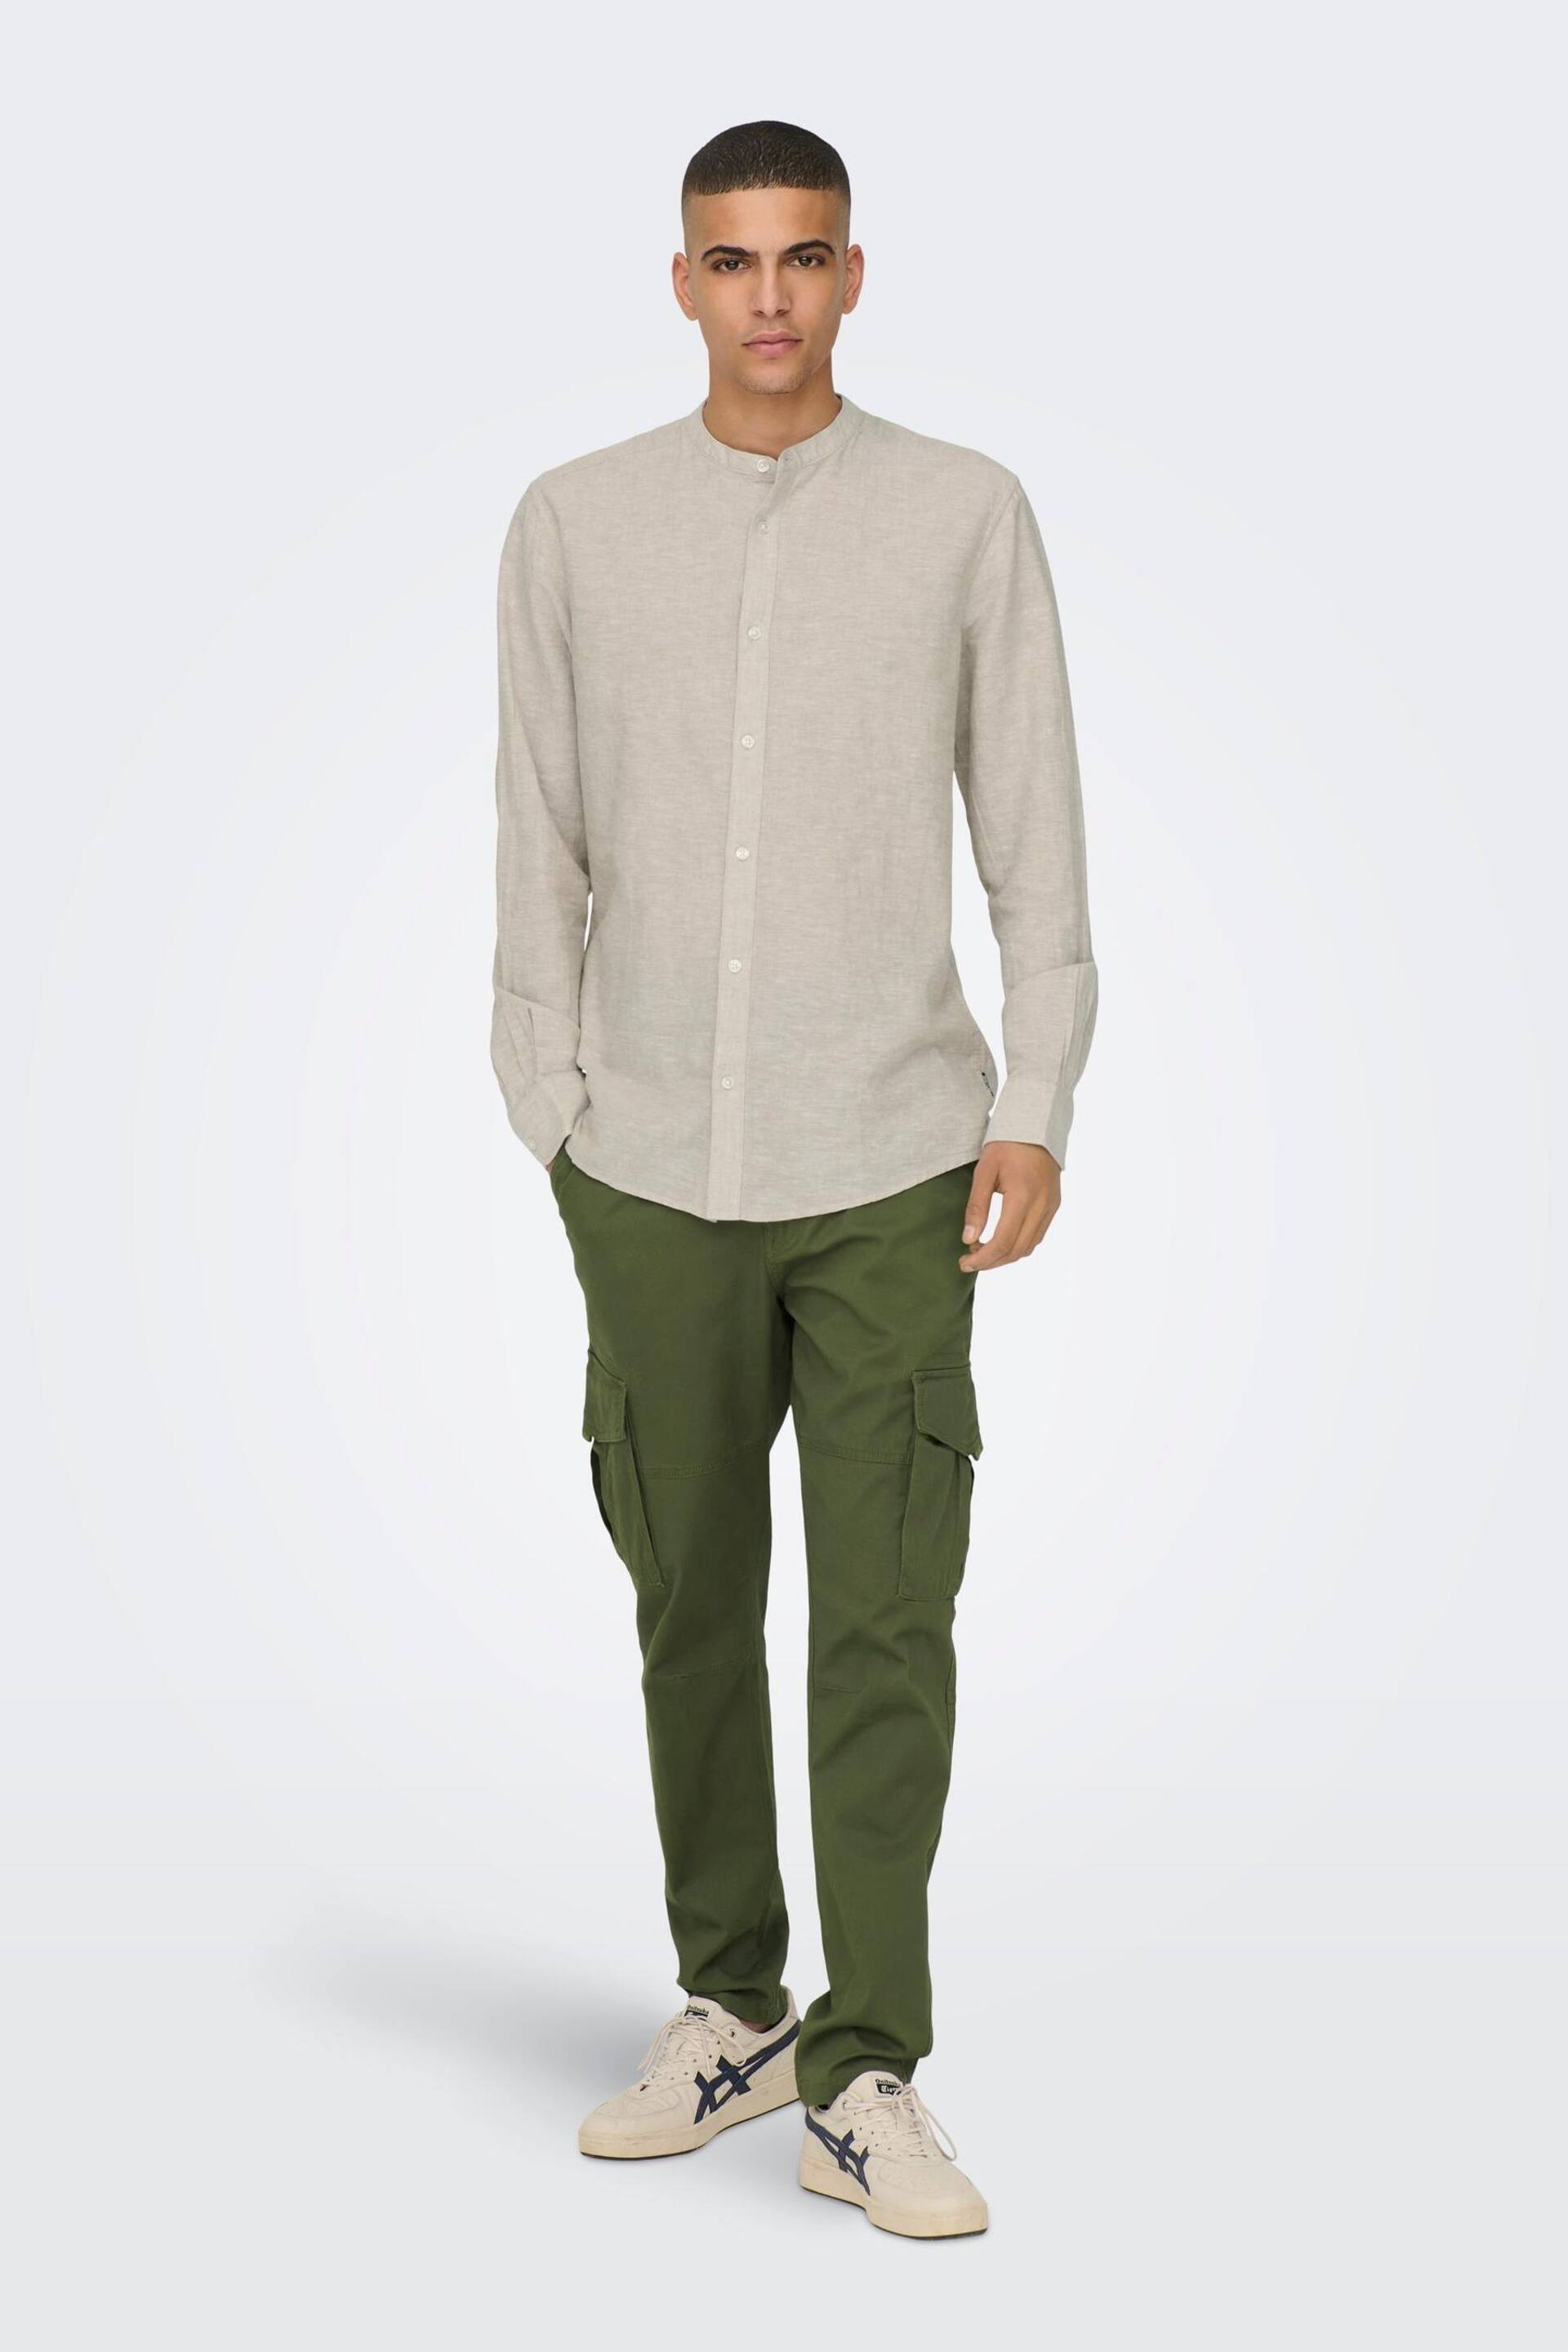 Only & Sons Green Straight Leg Cargo Trousers - Image 3 of 8